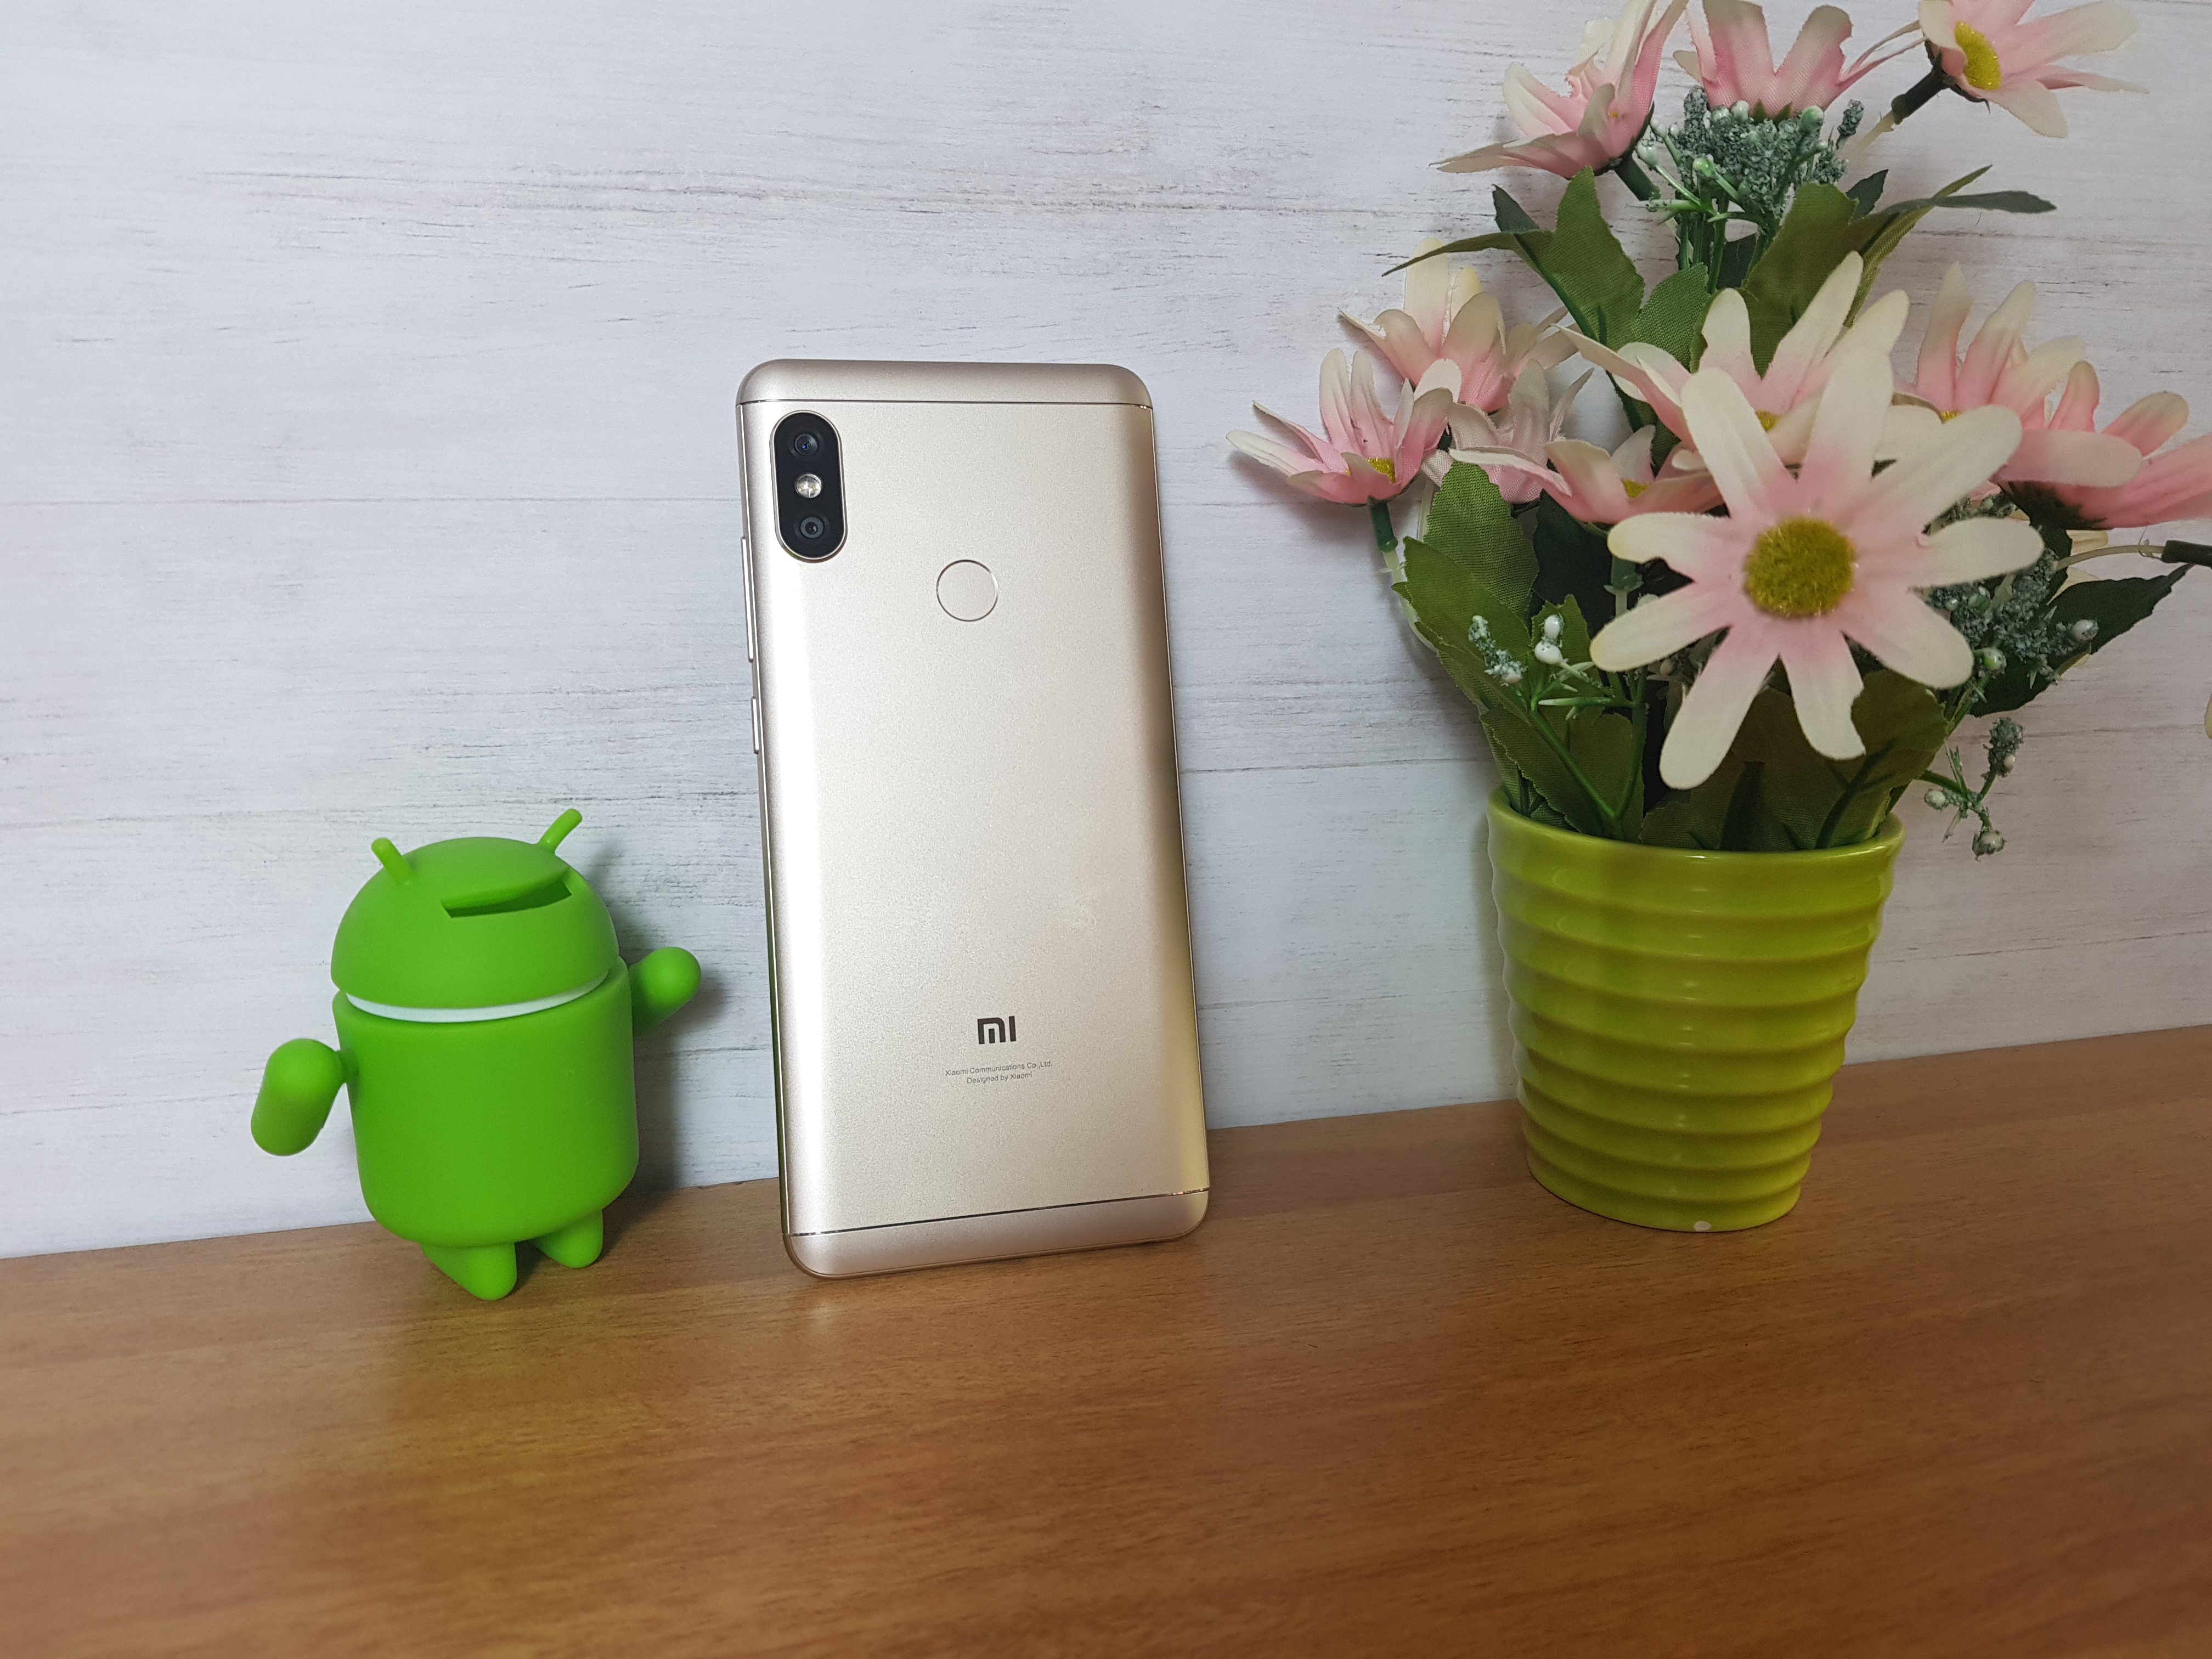 Camera Features of Redmi Note 5 Pro